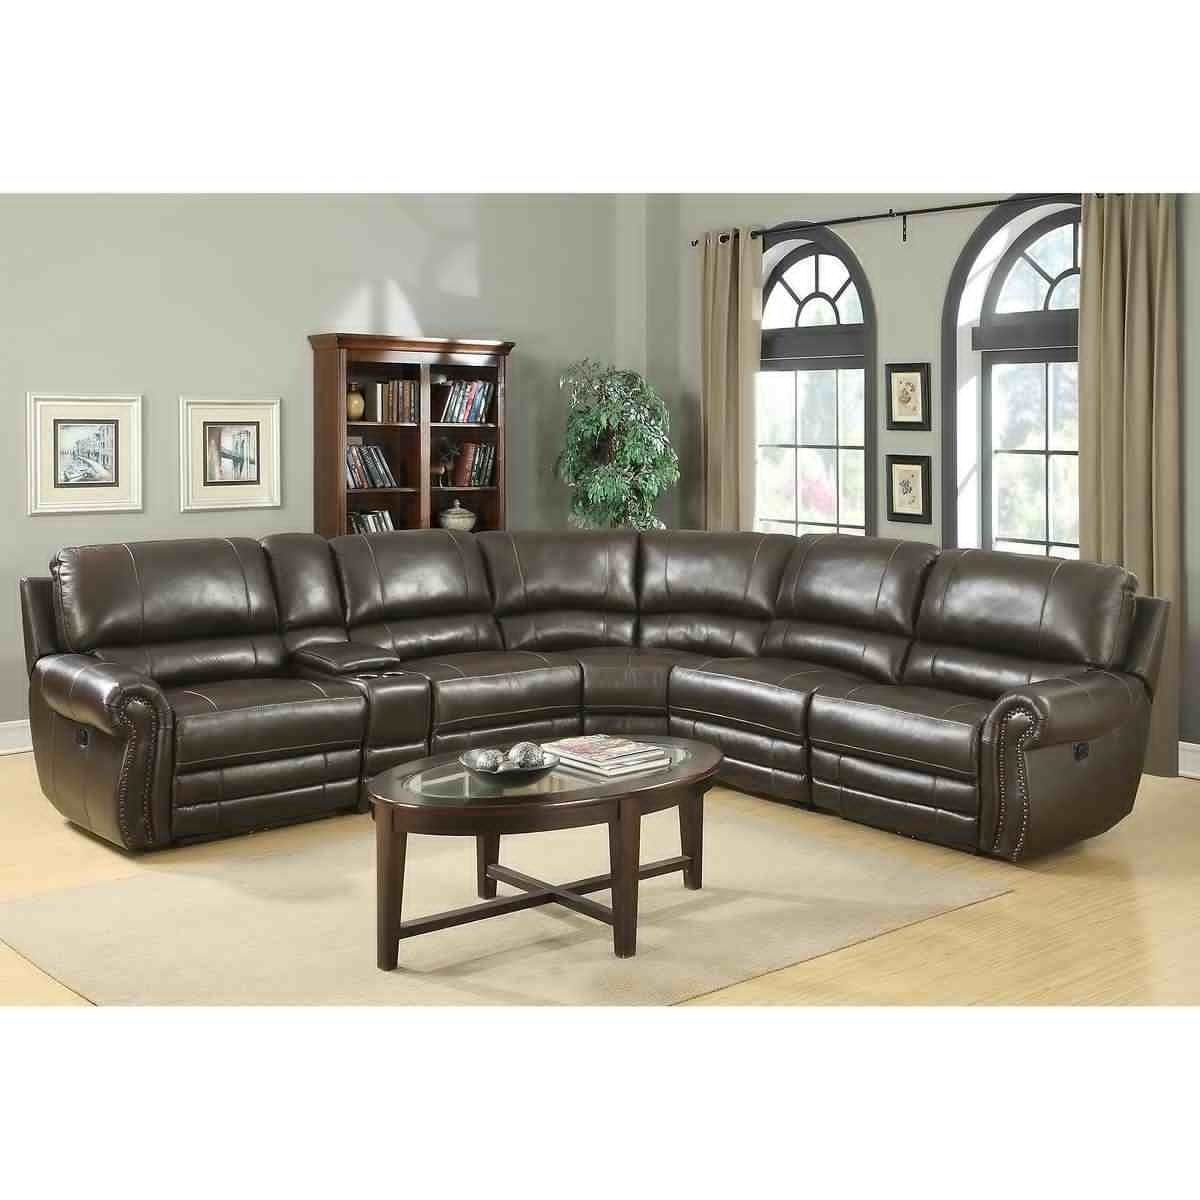 Minneapolis Sectional Sofas Intended For Latest Sectional Sofa Design: Leather Sectional Sofas Closeouts Recliners (Photo 9 of 20)